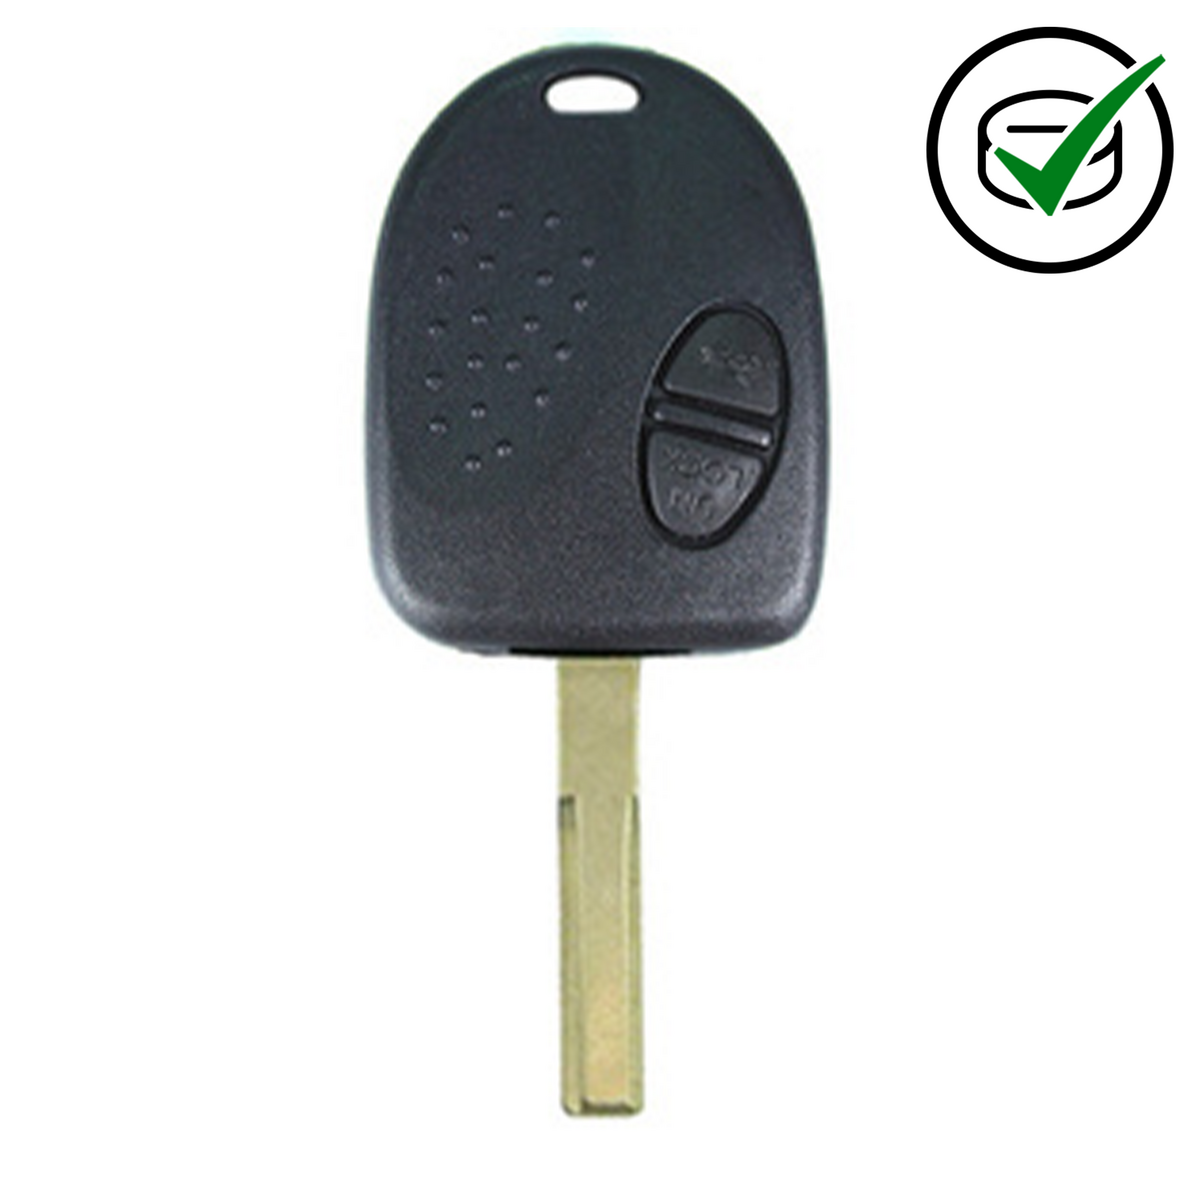 Holden 2 button remote with Blade and screws 304MHz